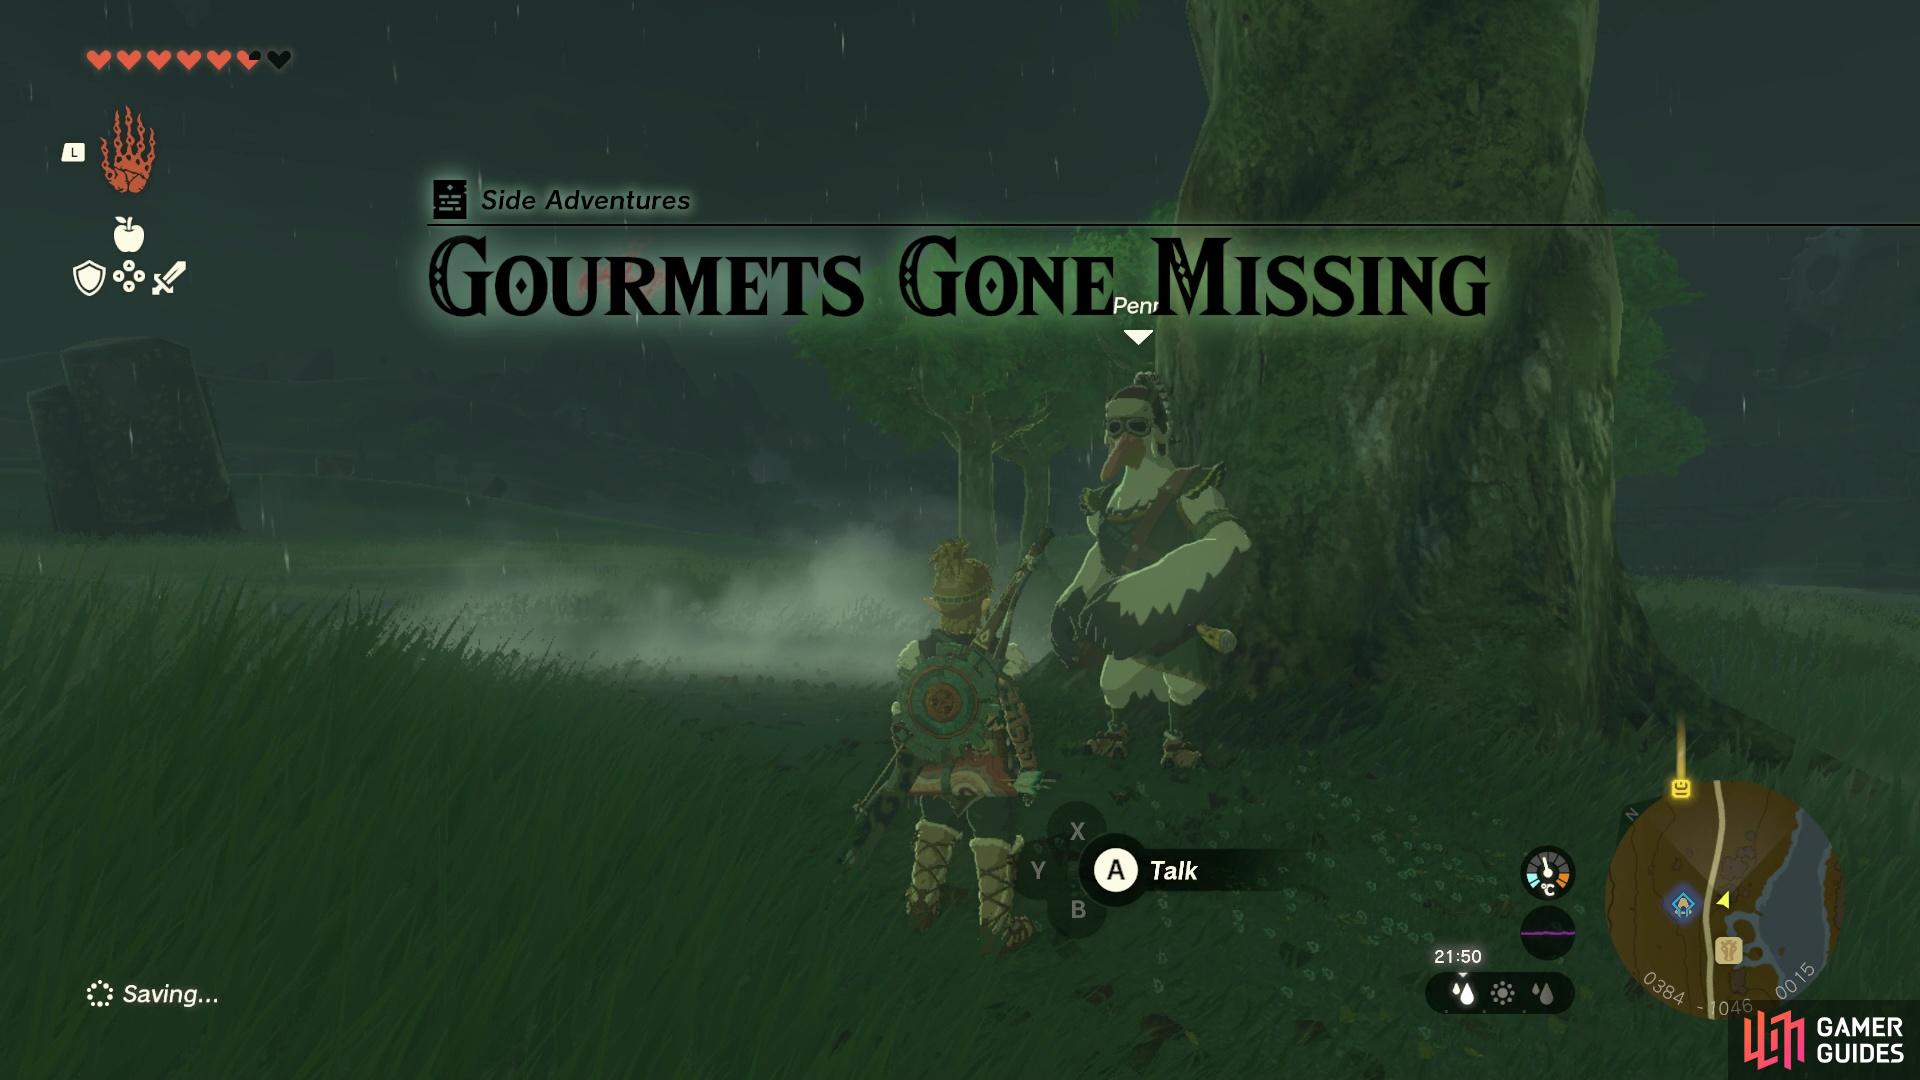 Gourmets Gone Missing.